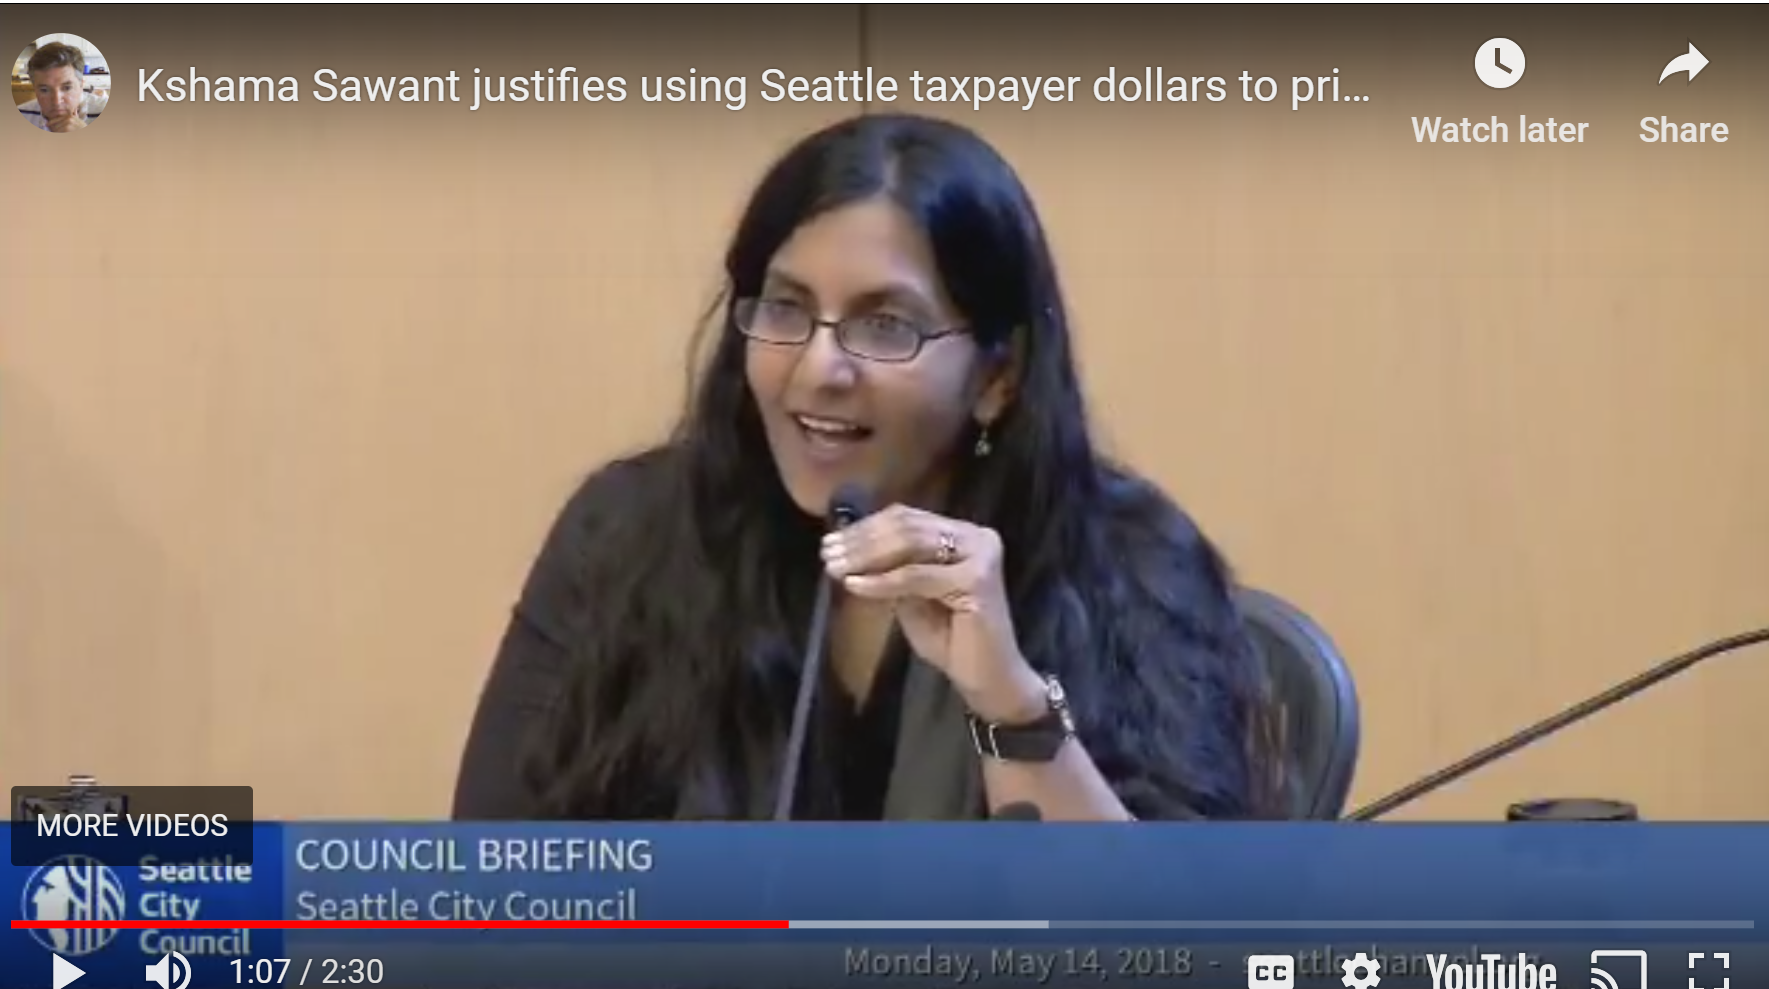 Kshama Sawant Uses Taxpayer Dollars for Her Political Movements: Not OK.